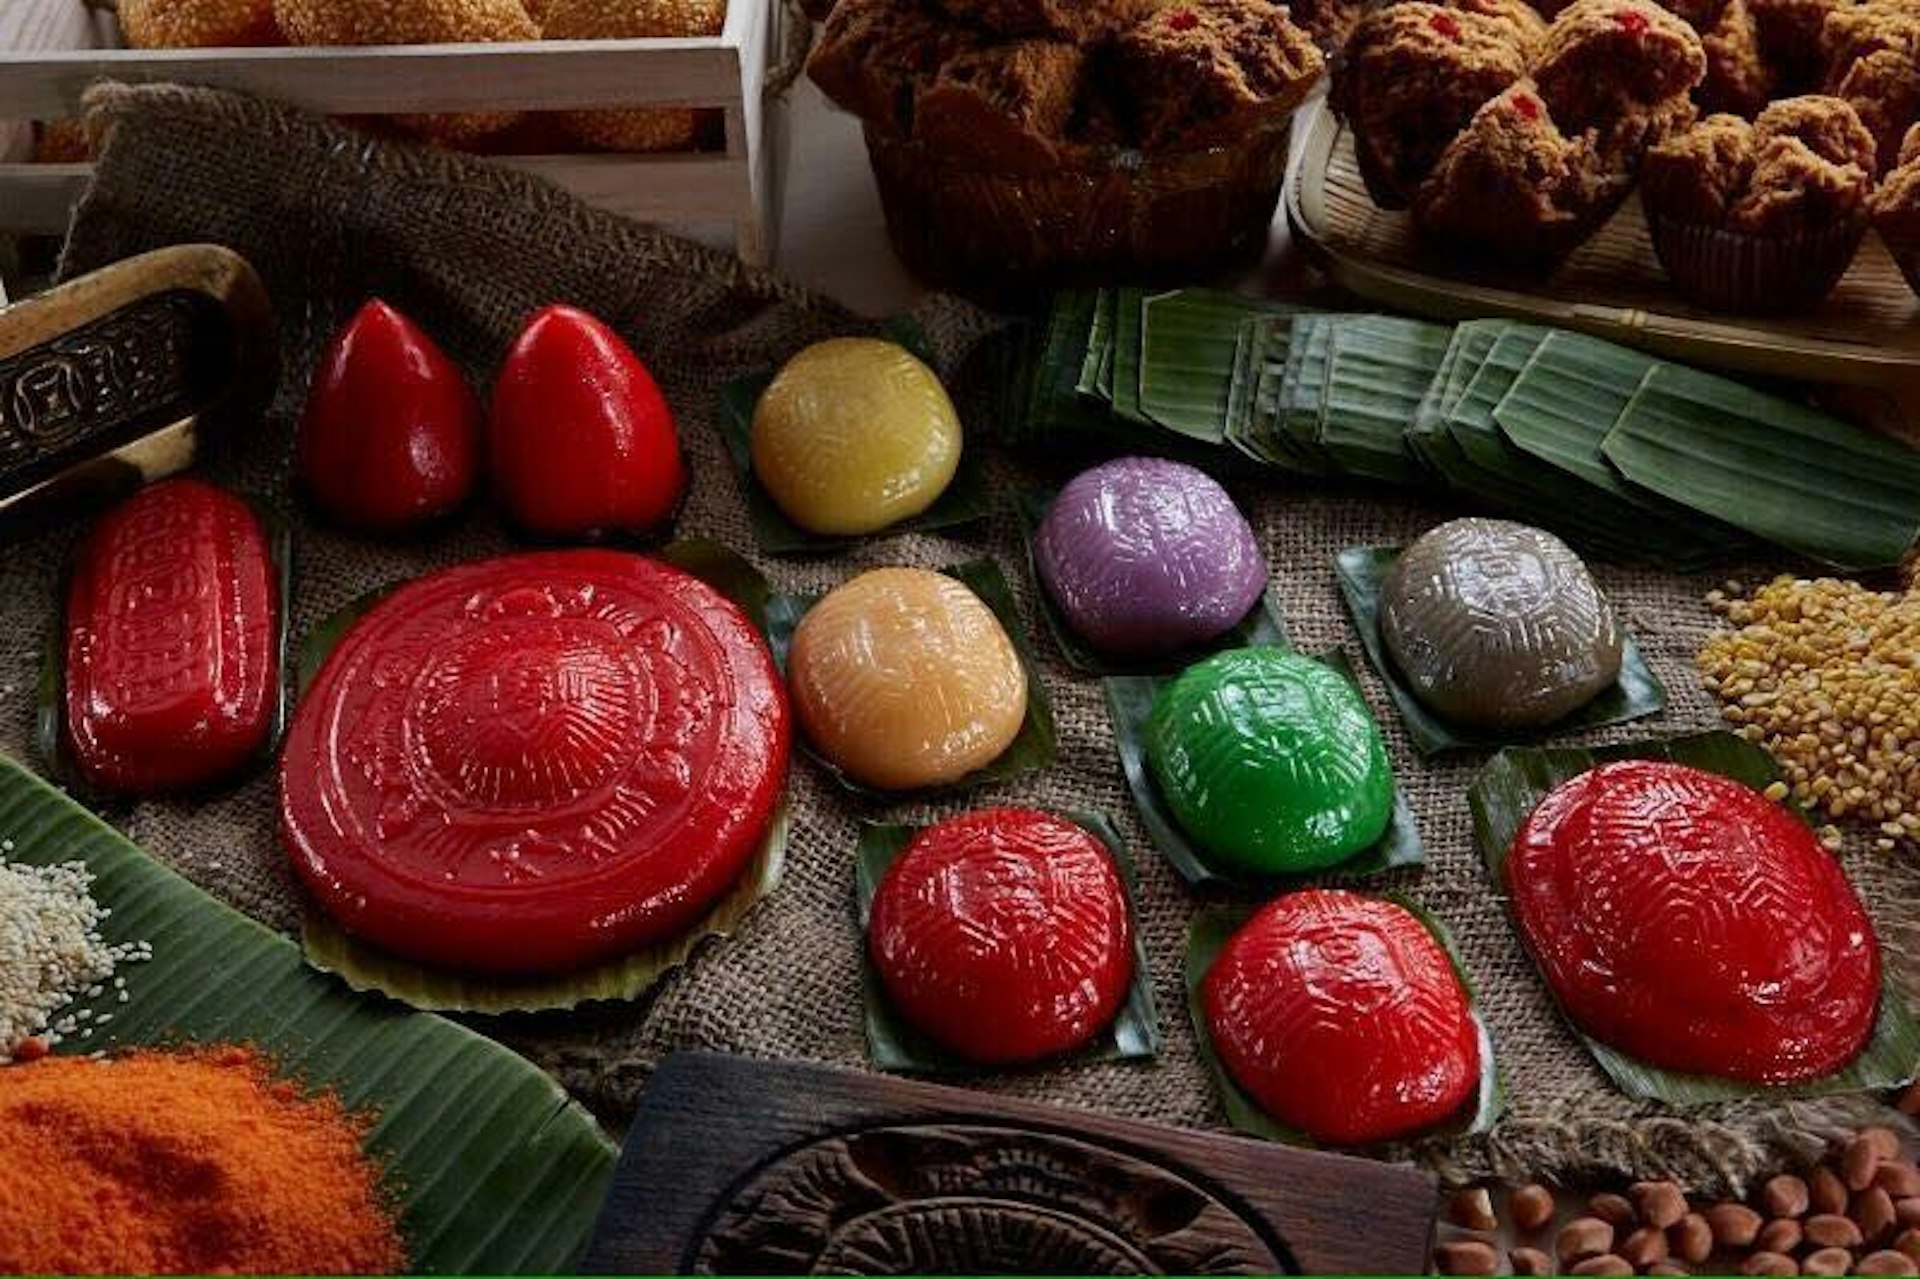 Find a rainbow of sweet treats in Singapore's Everton Park, like this glutinous rice gems at Ji Xiang Confectionery. Image courtesy of Ji Xiang Confectionery